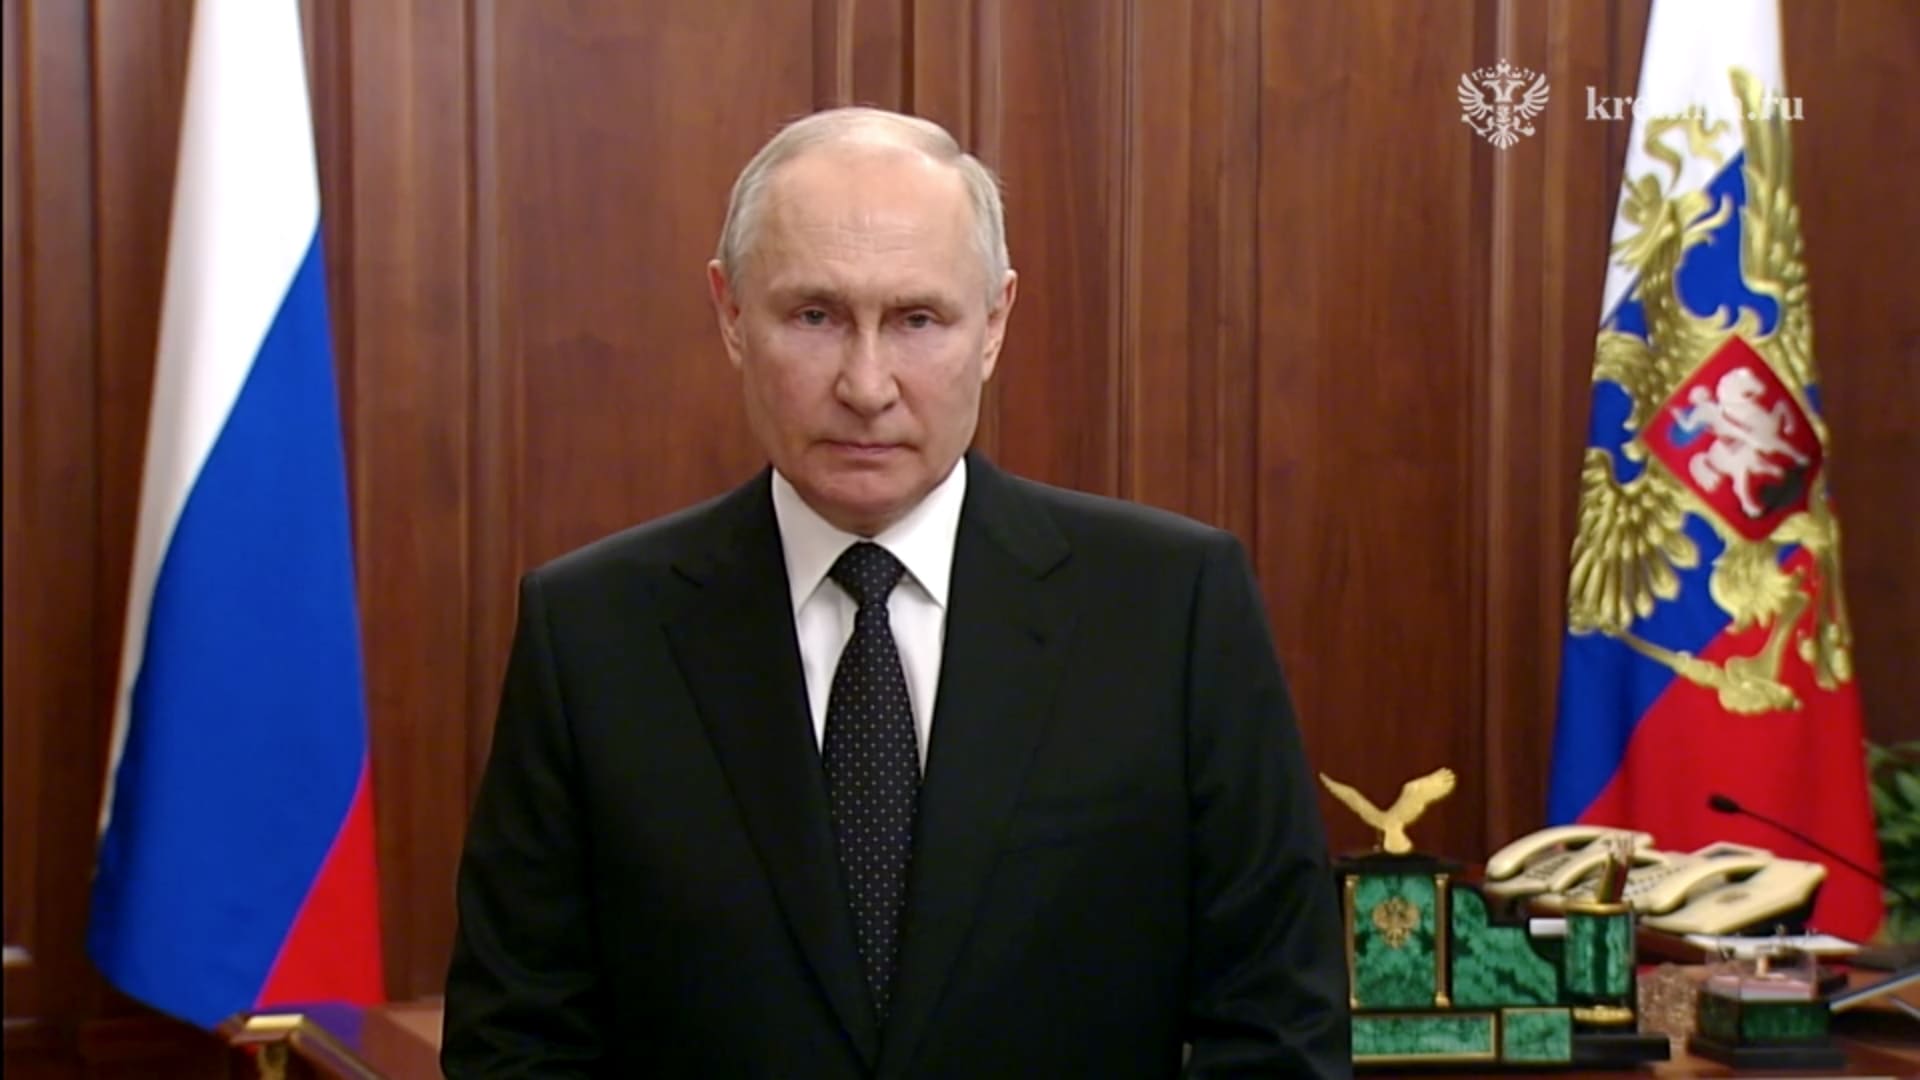 A screen grab captured from a video shows Russian President Vladimir Putin making a statement amid escalating tensions between the Kremlin and the head of paramilitary group Wagner in Moscow on June 24, 2023.